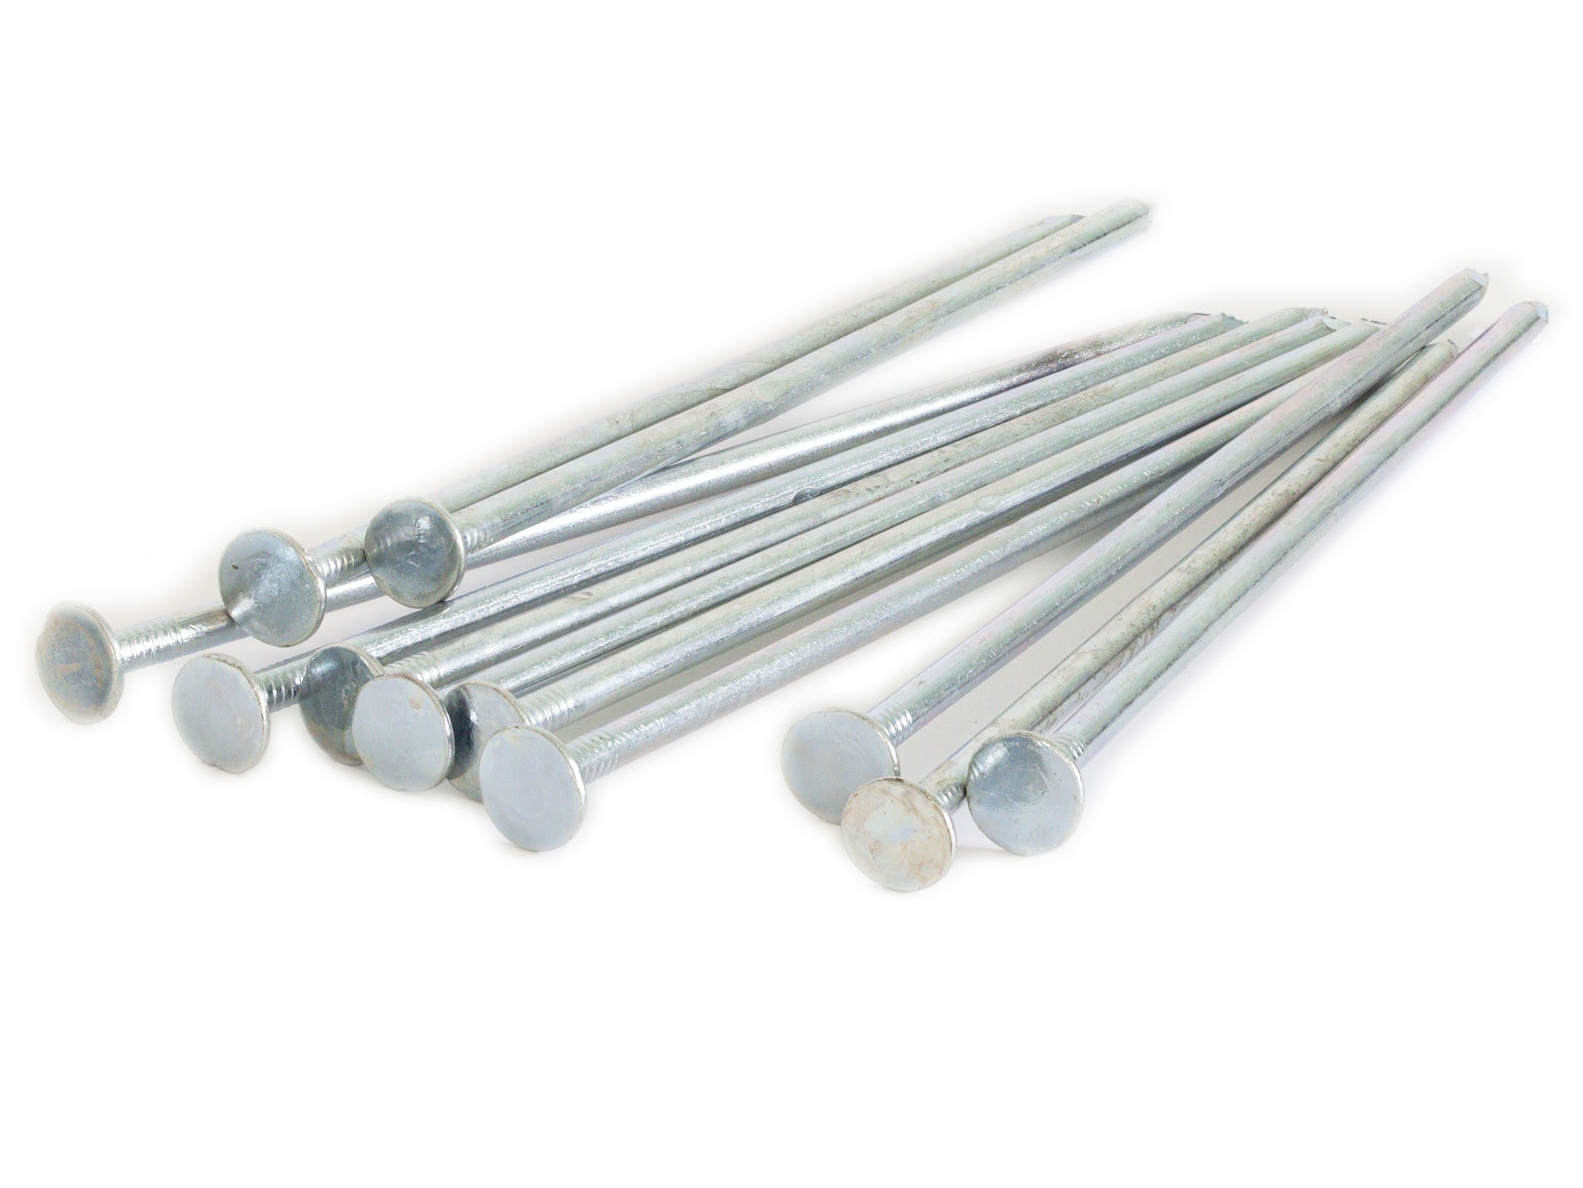 Galvanized spikes nails for synthetic turf installation